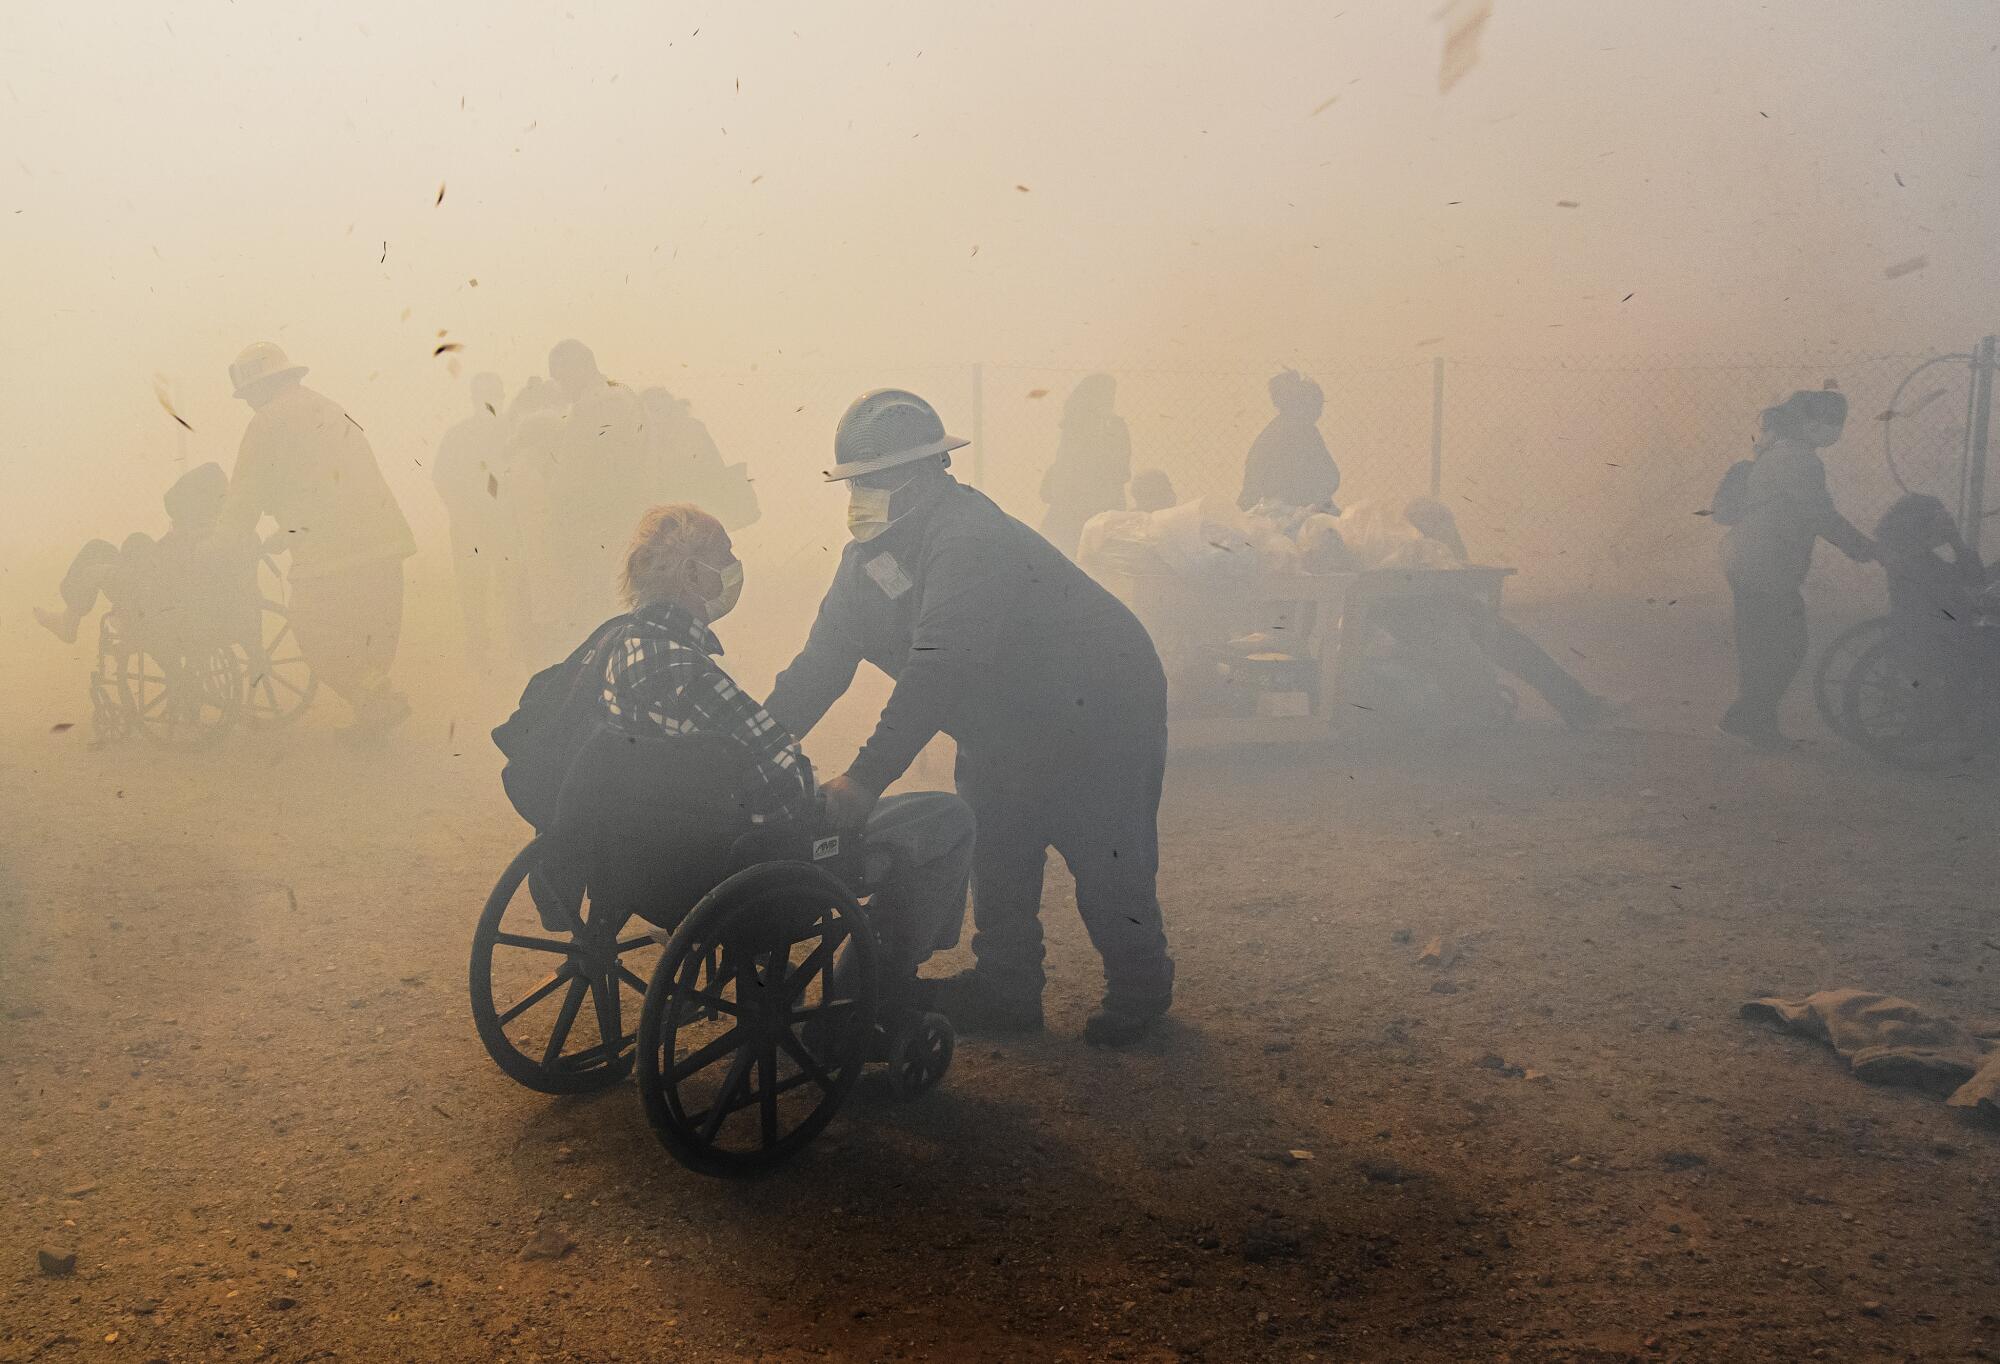 Workers help people in wheelchairs outside in smoky air.